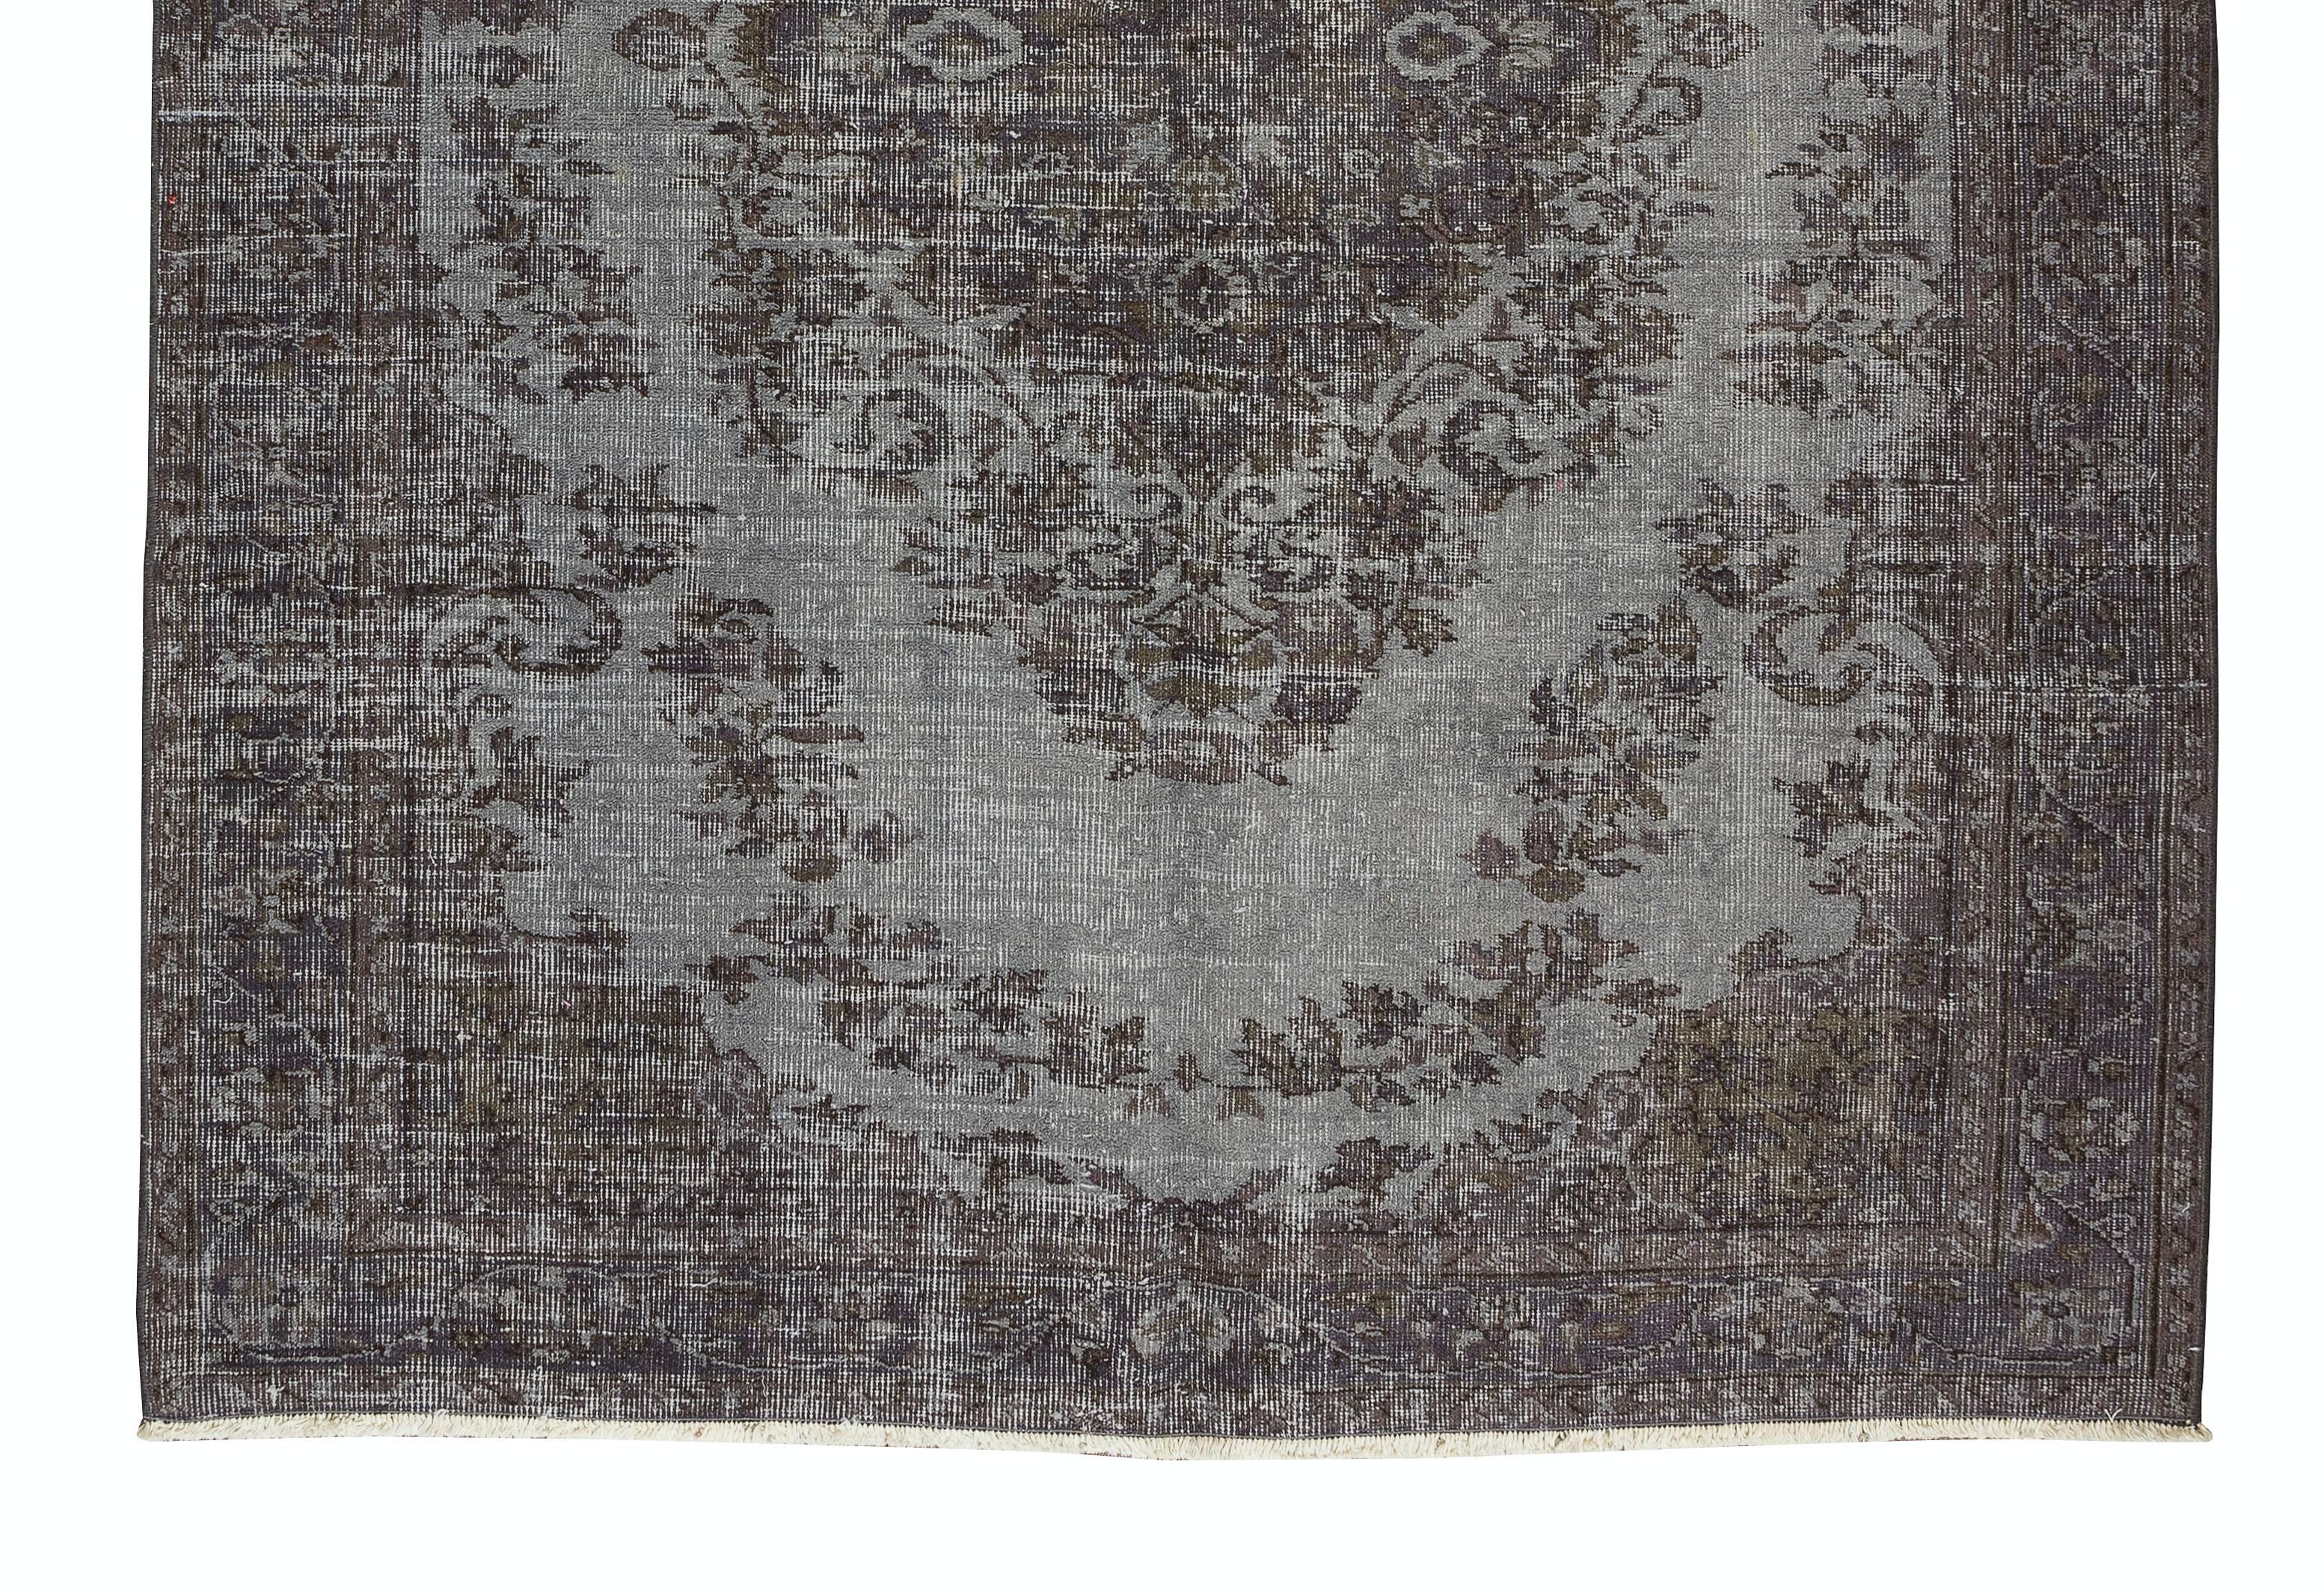 5.5x7.6 Ft Vintage Medallion Design Area Rug in Gray, Hand-Knotted in Turkey In Good Condition For Sale In Philadelphia, PA